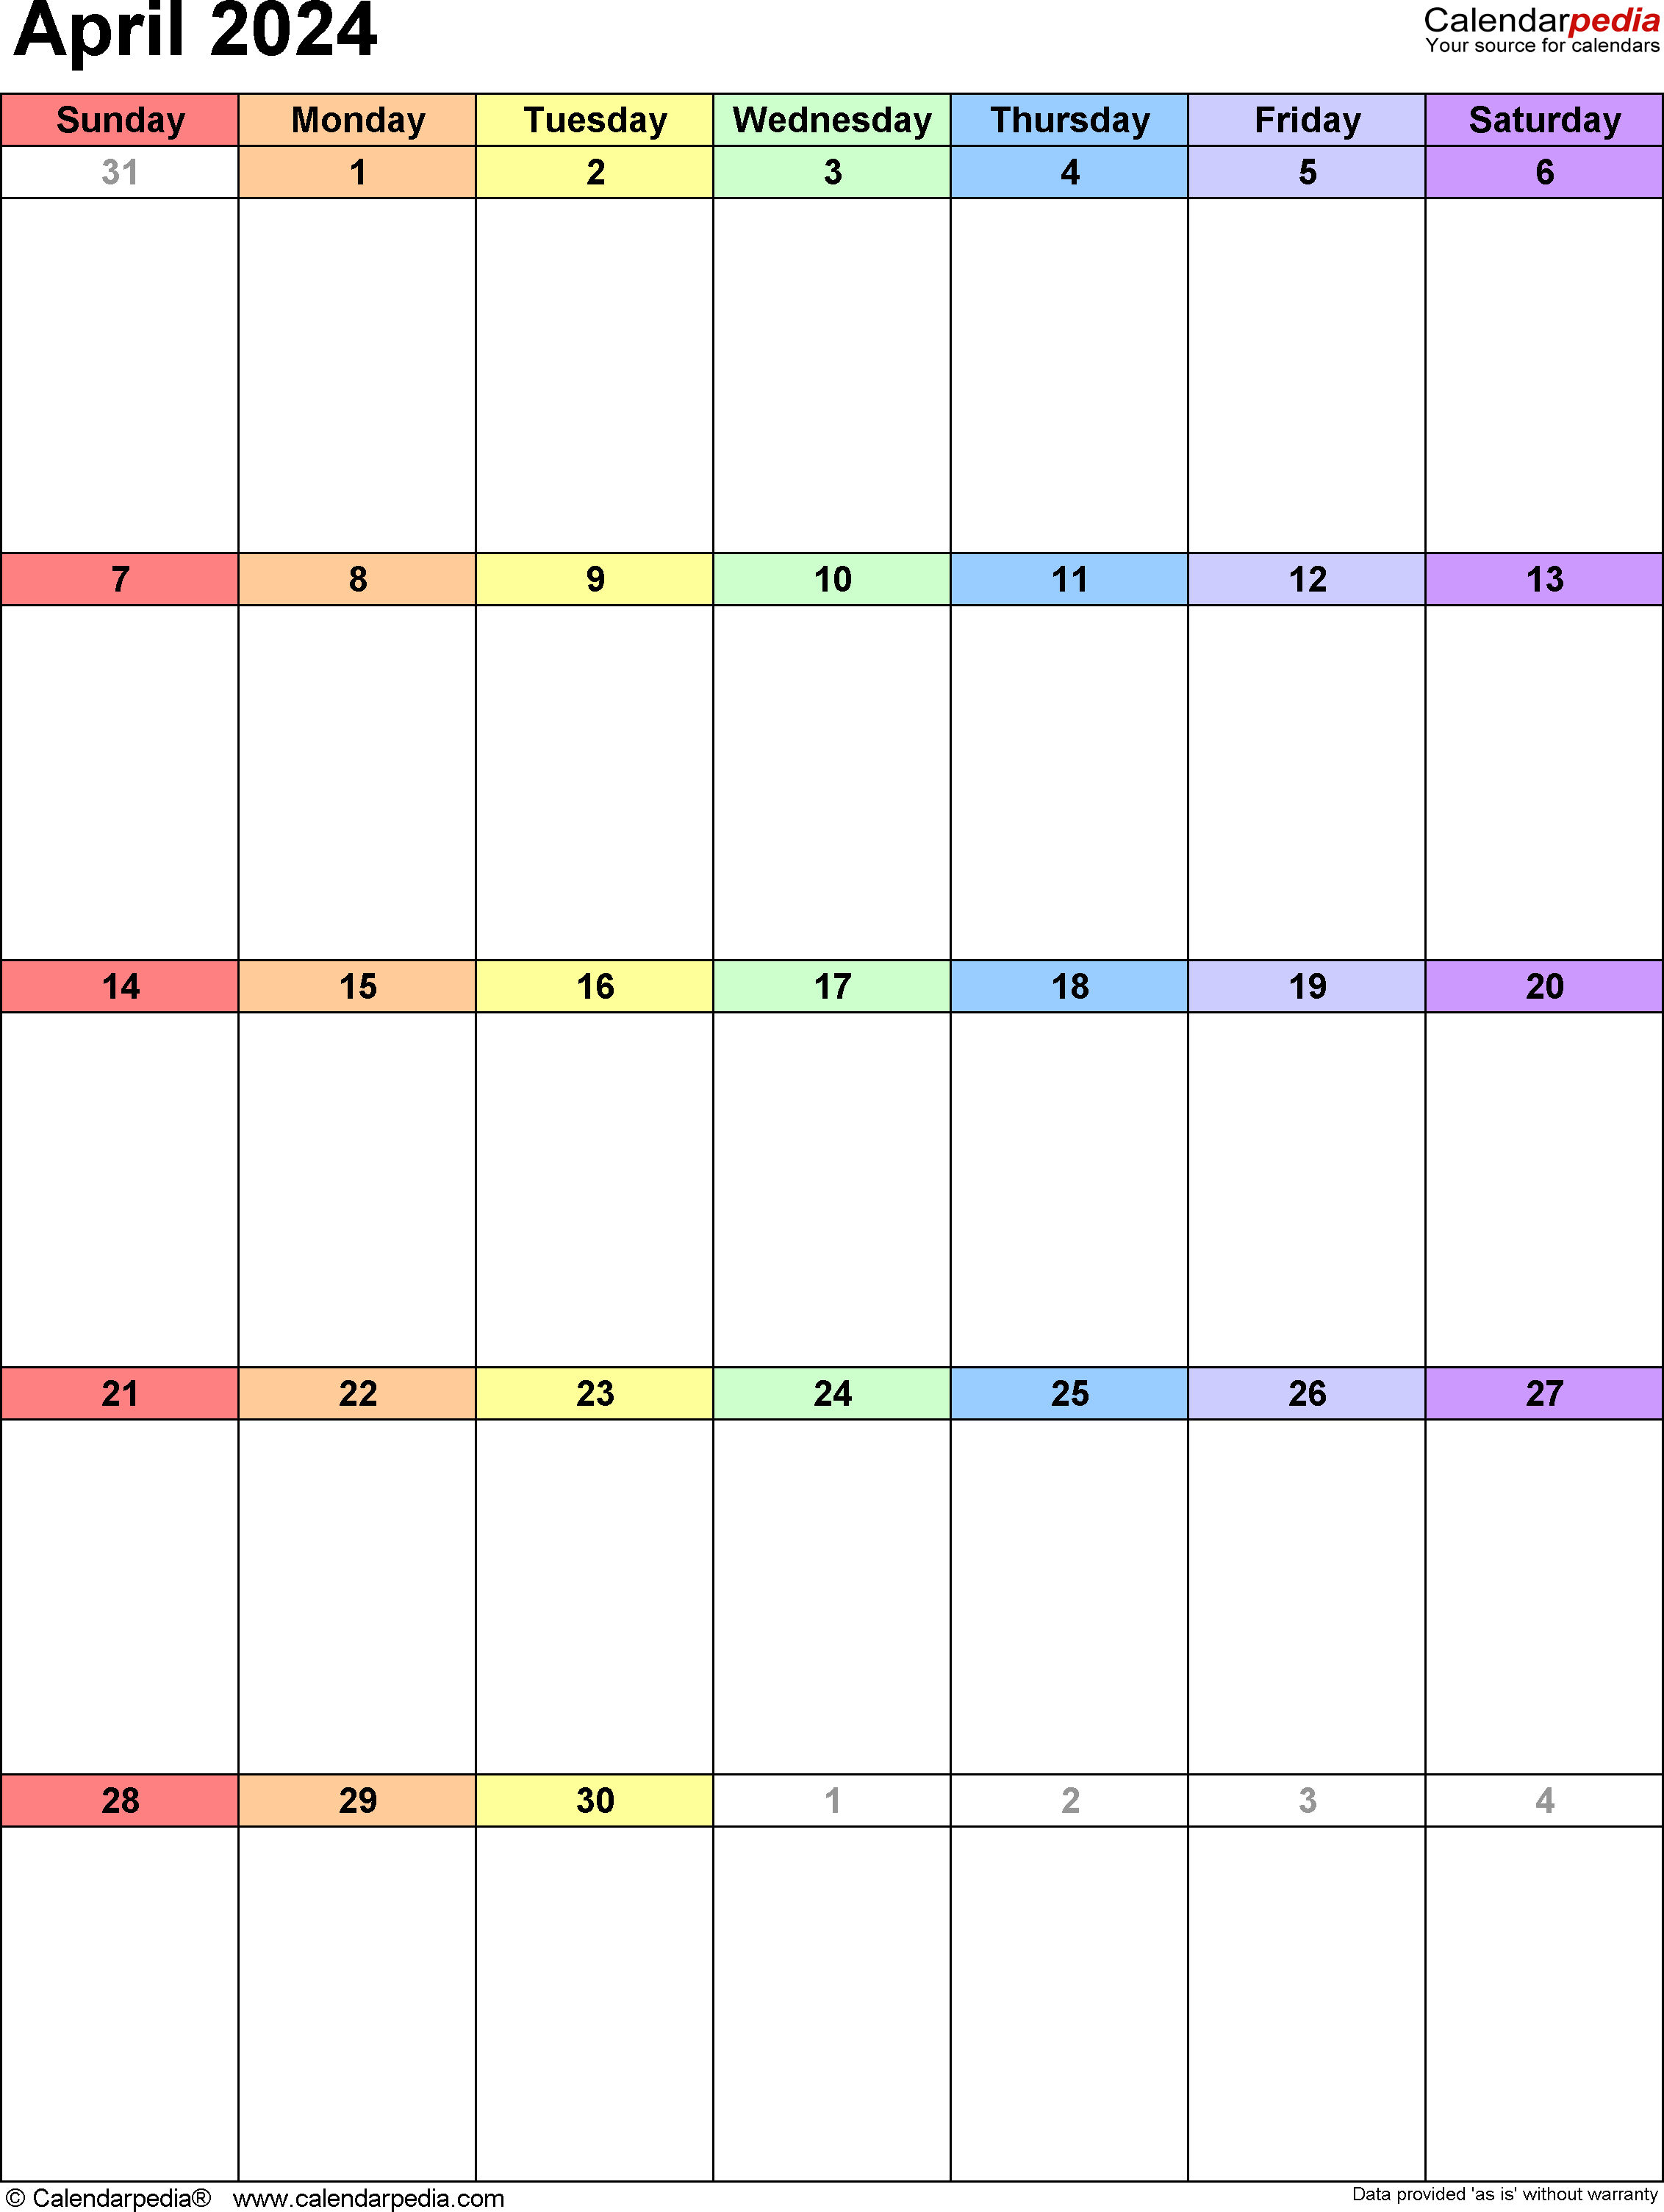 April 2024 Calendar | Templates For Word, Excel And Pdf intended for Fillable Calendar April 2024